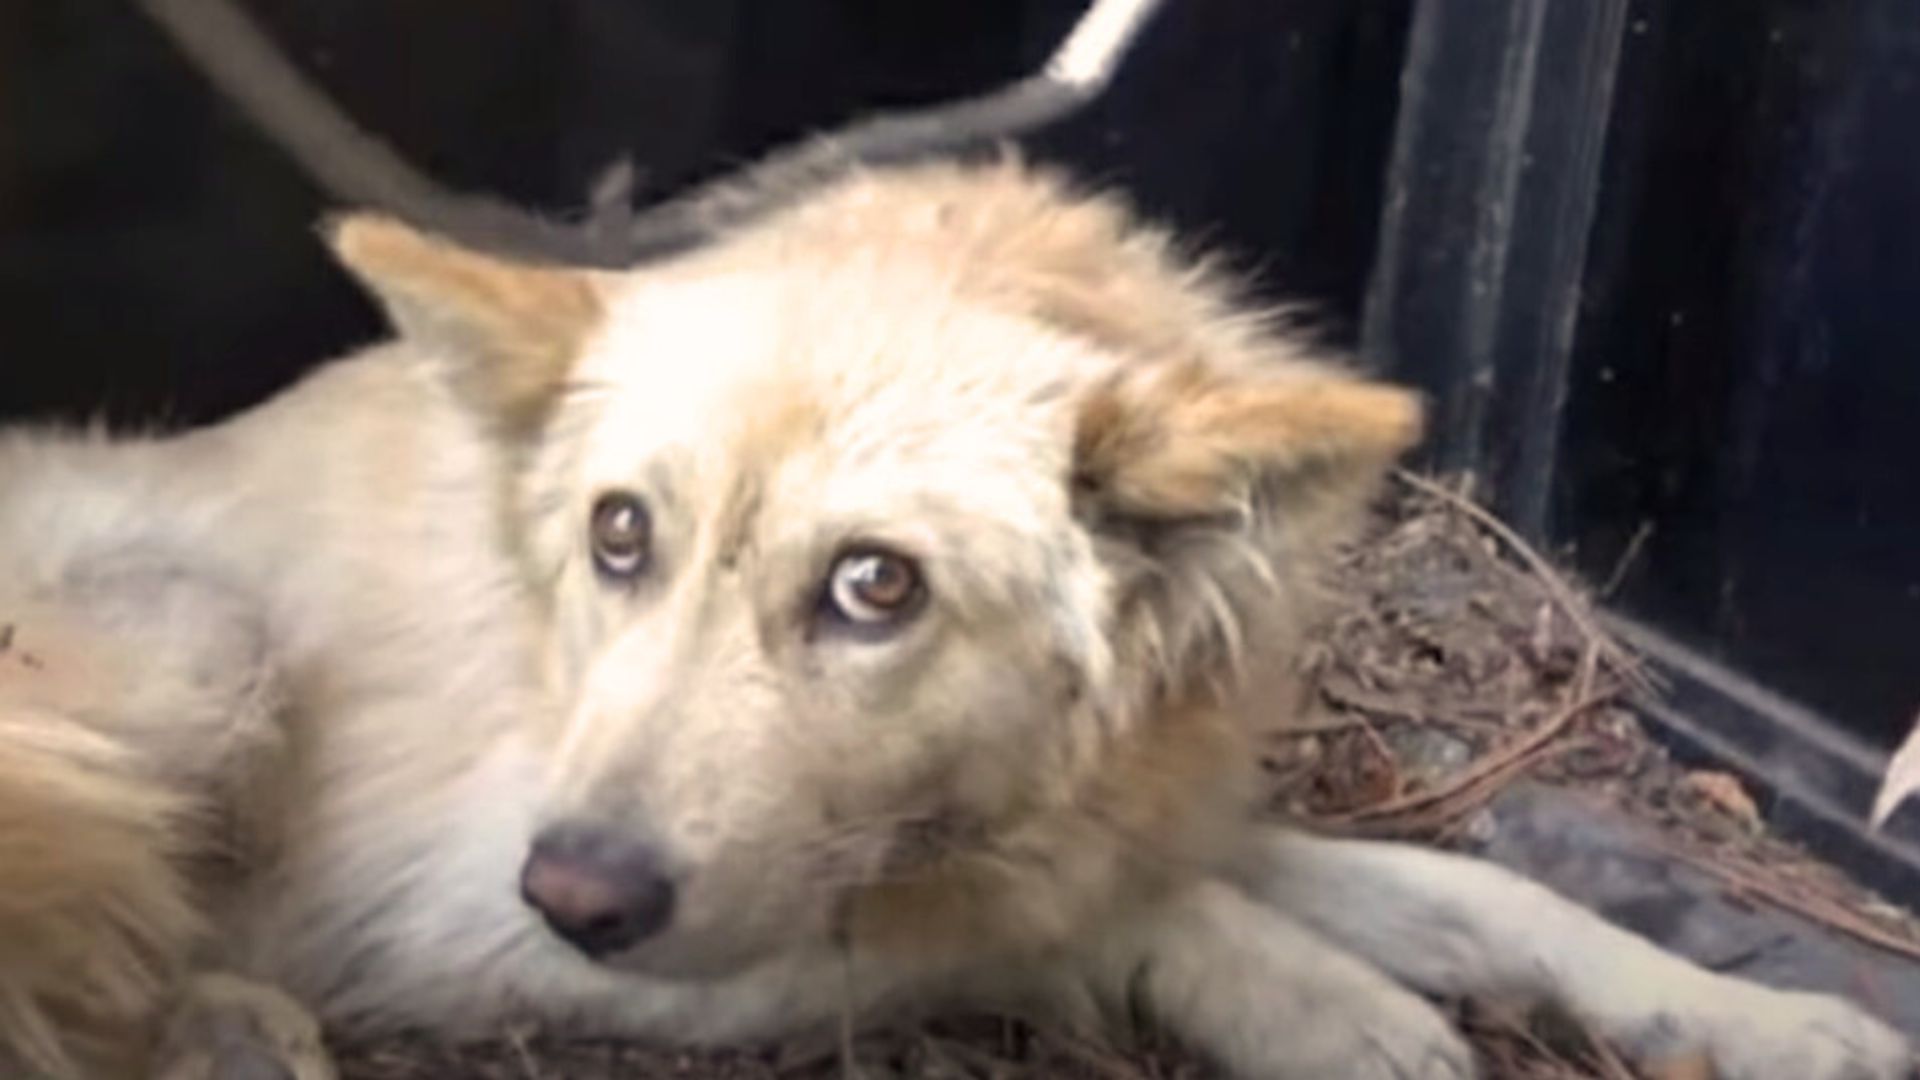 Man Who Spotted A Motionless Dog Saw In His Eyes That He Wanted Help